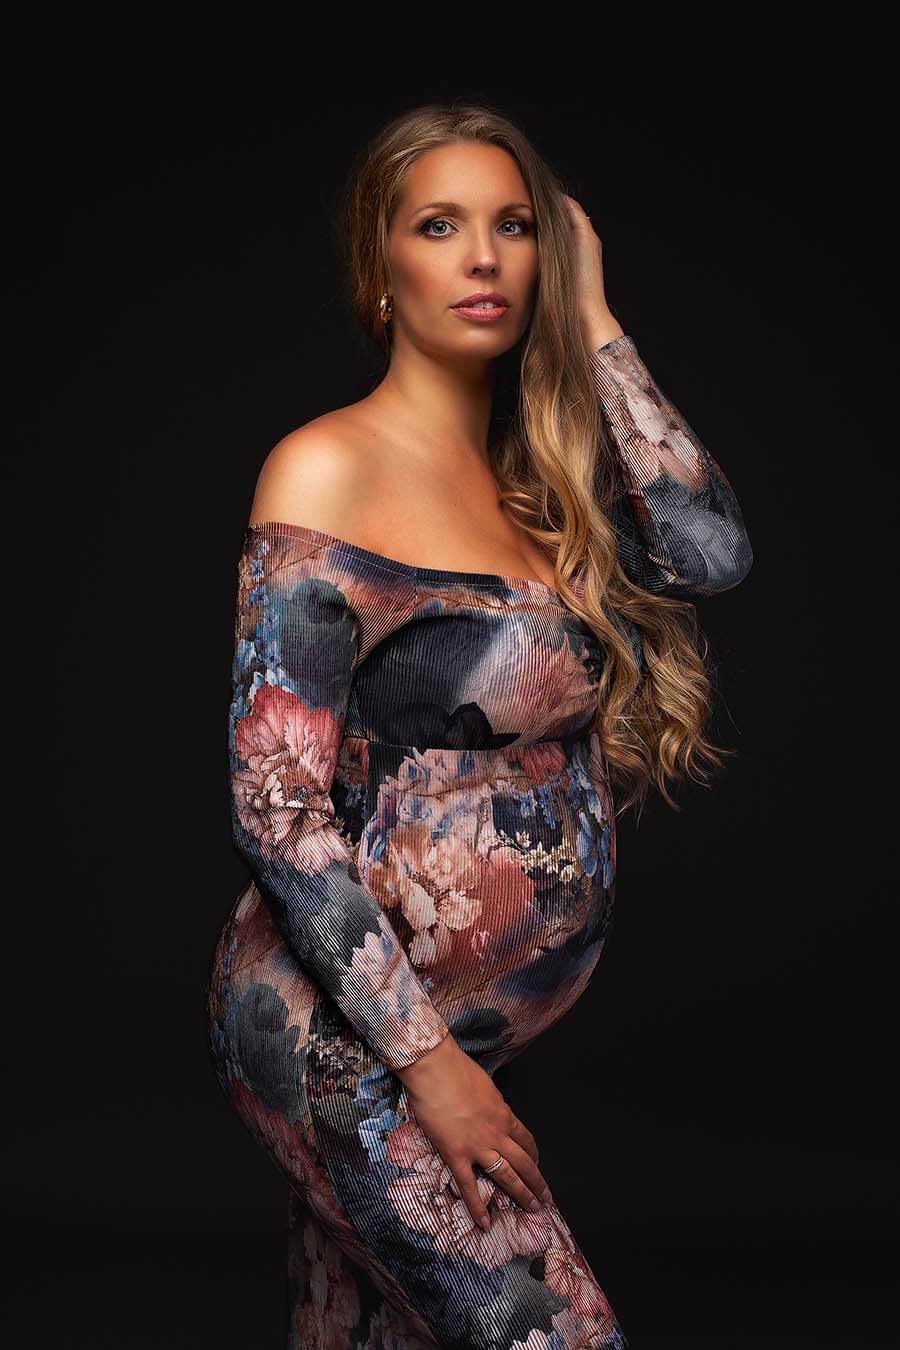 blond model poses during her maternity photo shoot in a studio wearing a long dress with long sleeves, off shoulder top and sweetheart neckline. the dress has a flower pattern and it is very tight.